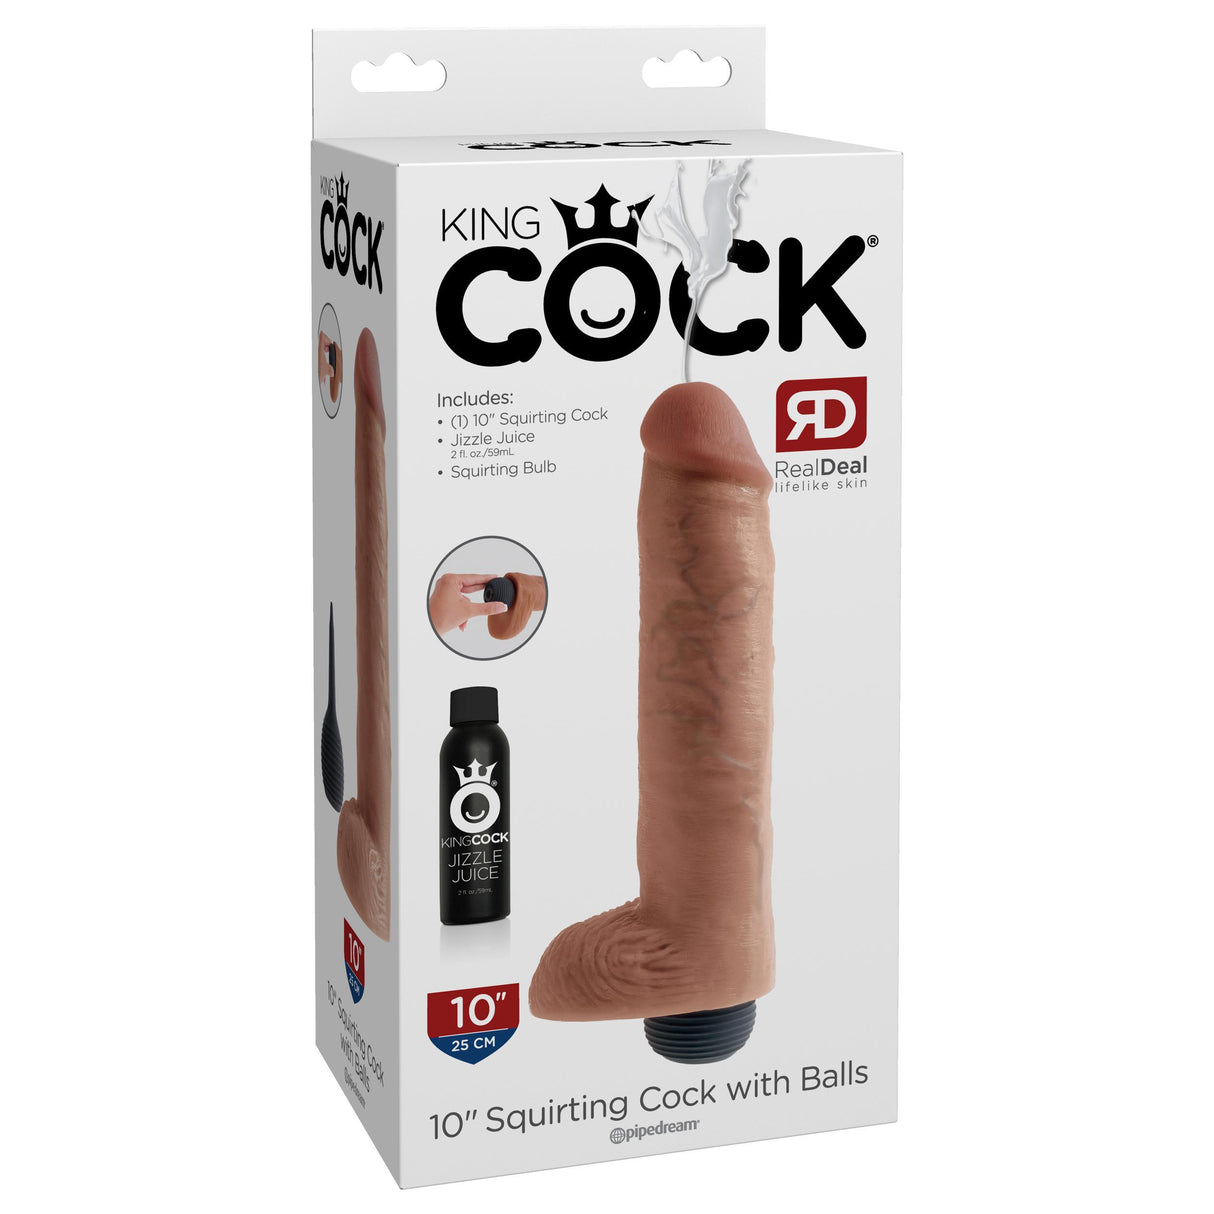 King Cock Squirting Cock with Balls